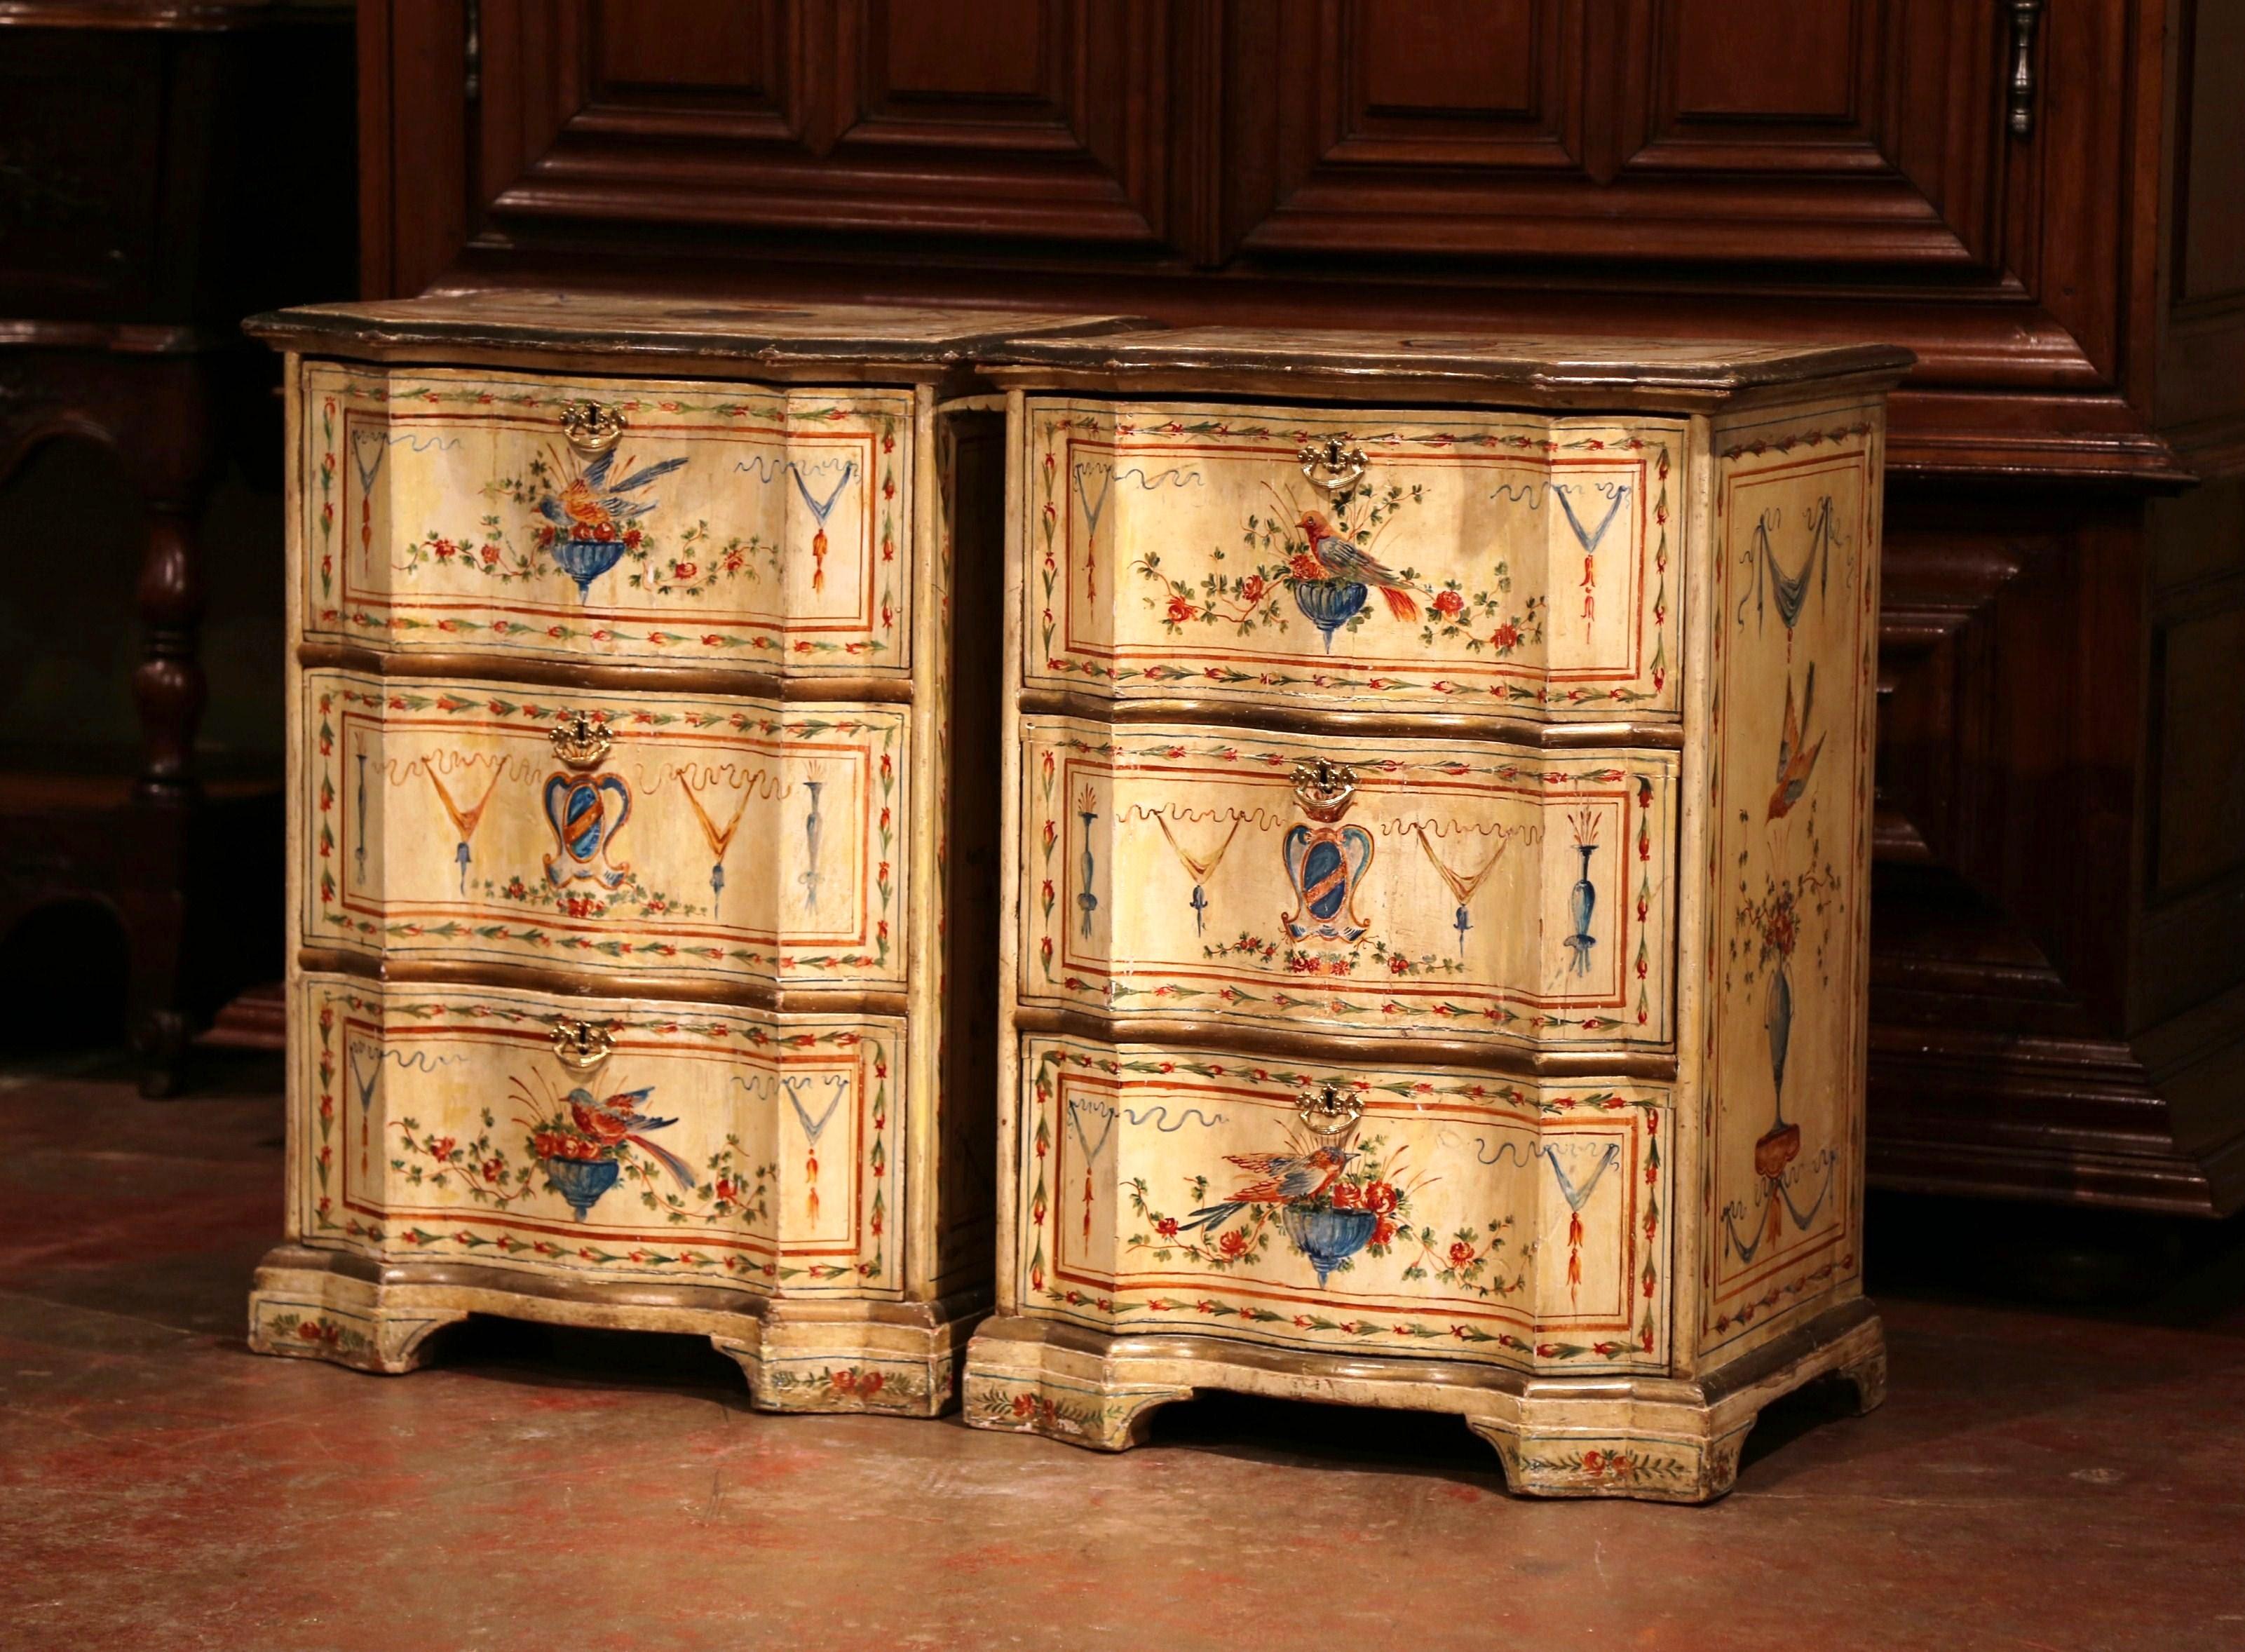 Pair of 19th Century Italian Carved Painted Chests of Drawers with Bird Decor (Kiefernholz)